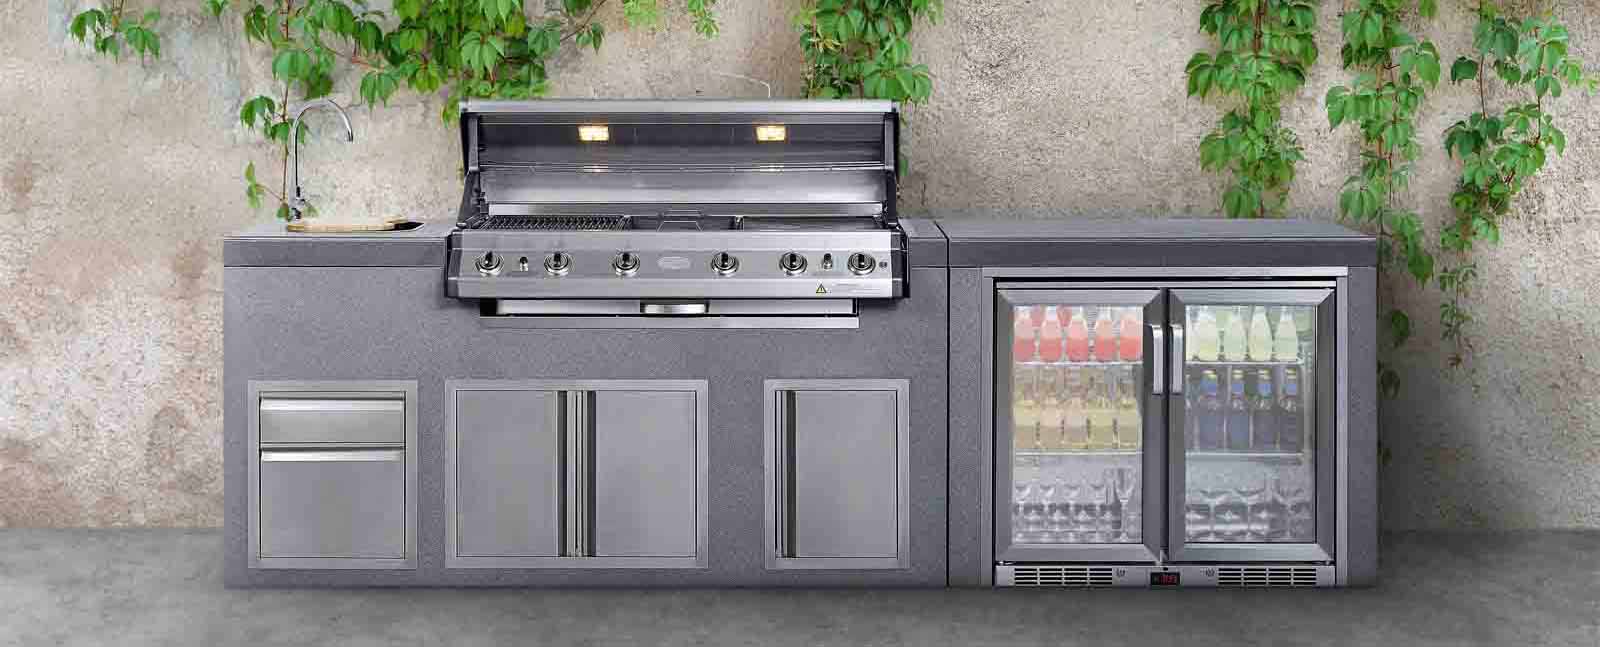 3 Of The Best Outdoor Kitchens For Summer Entertaining Harvey Norman Australia